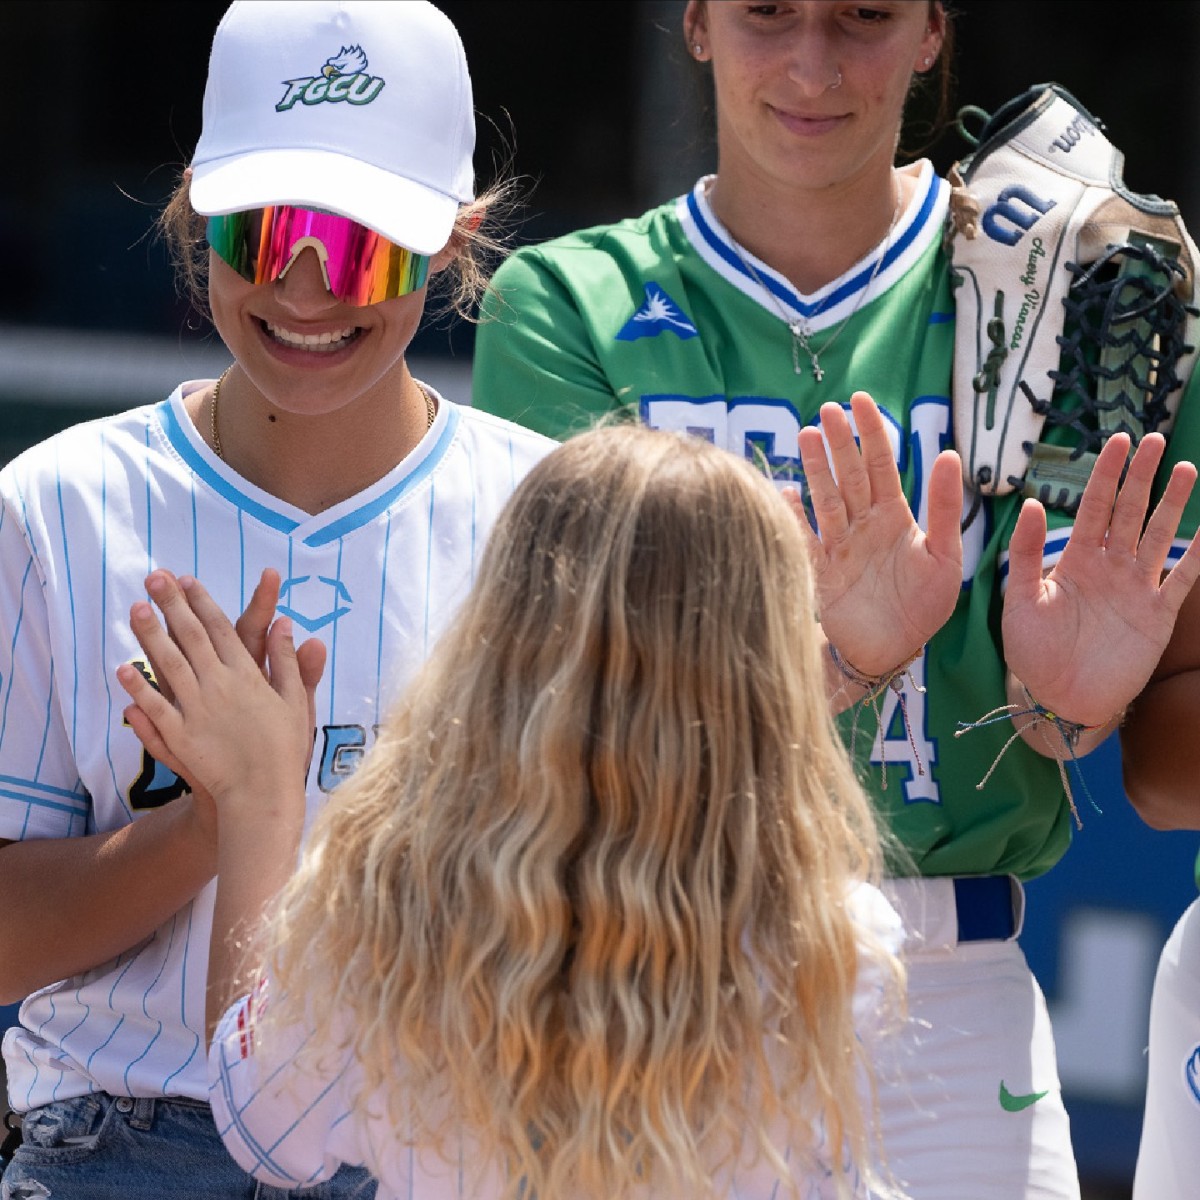 Take the kids out to the ballgame! 🥎 Kids 12 & under get FREE admission at this Saturday's doubleheader against Stetson! #WingsUp